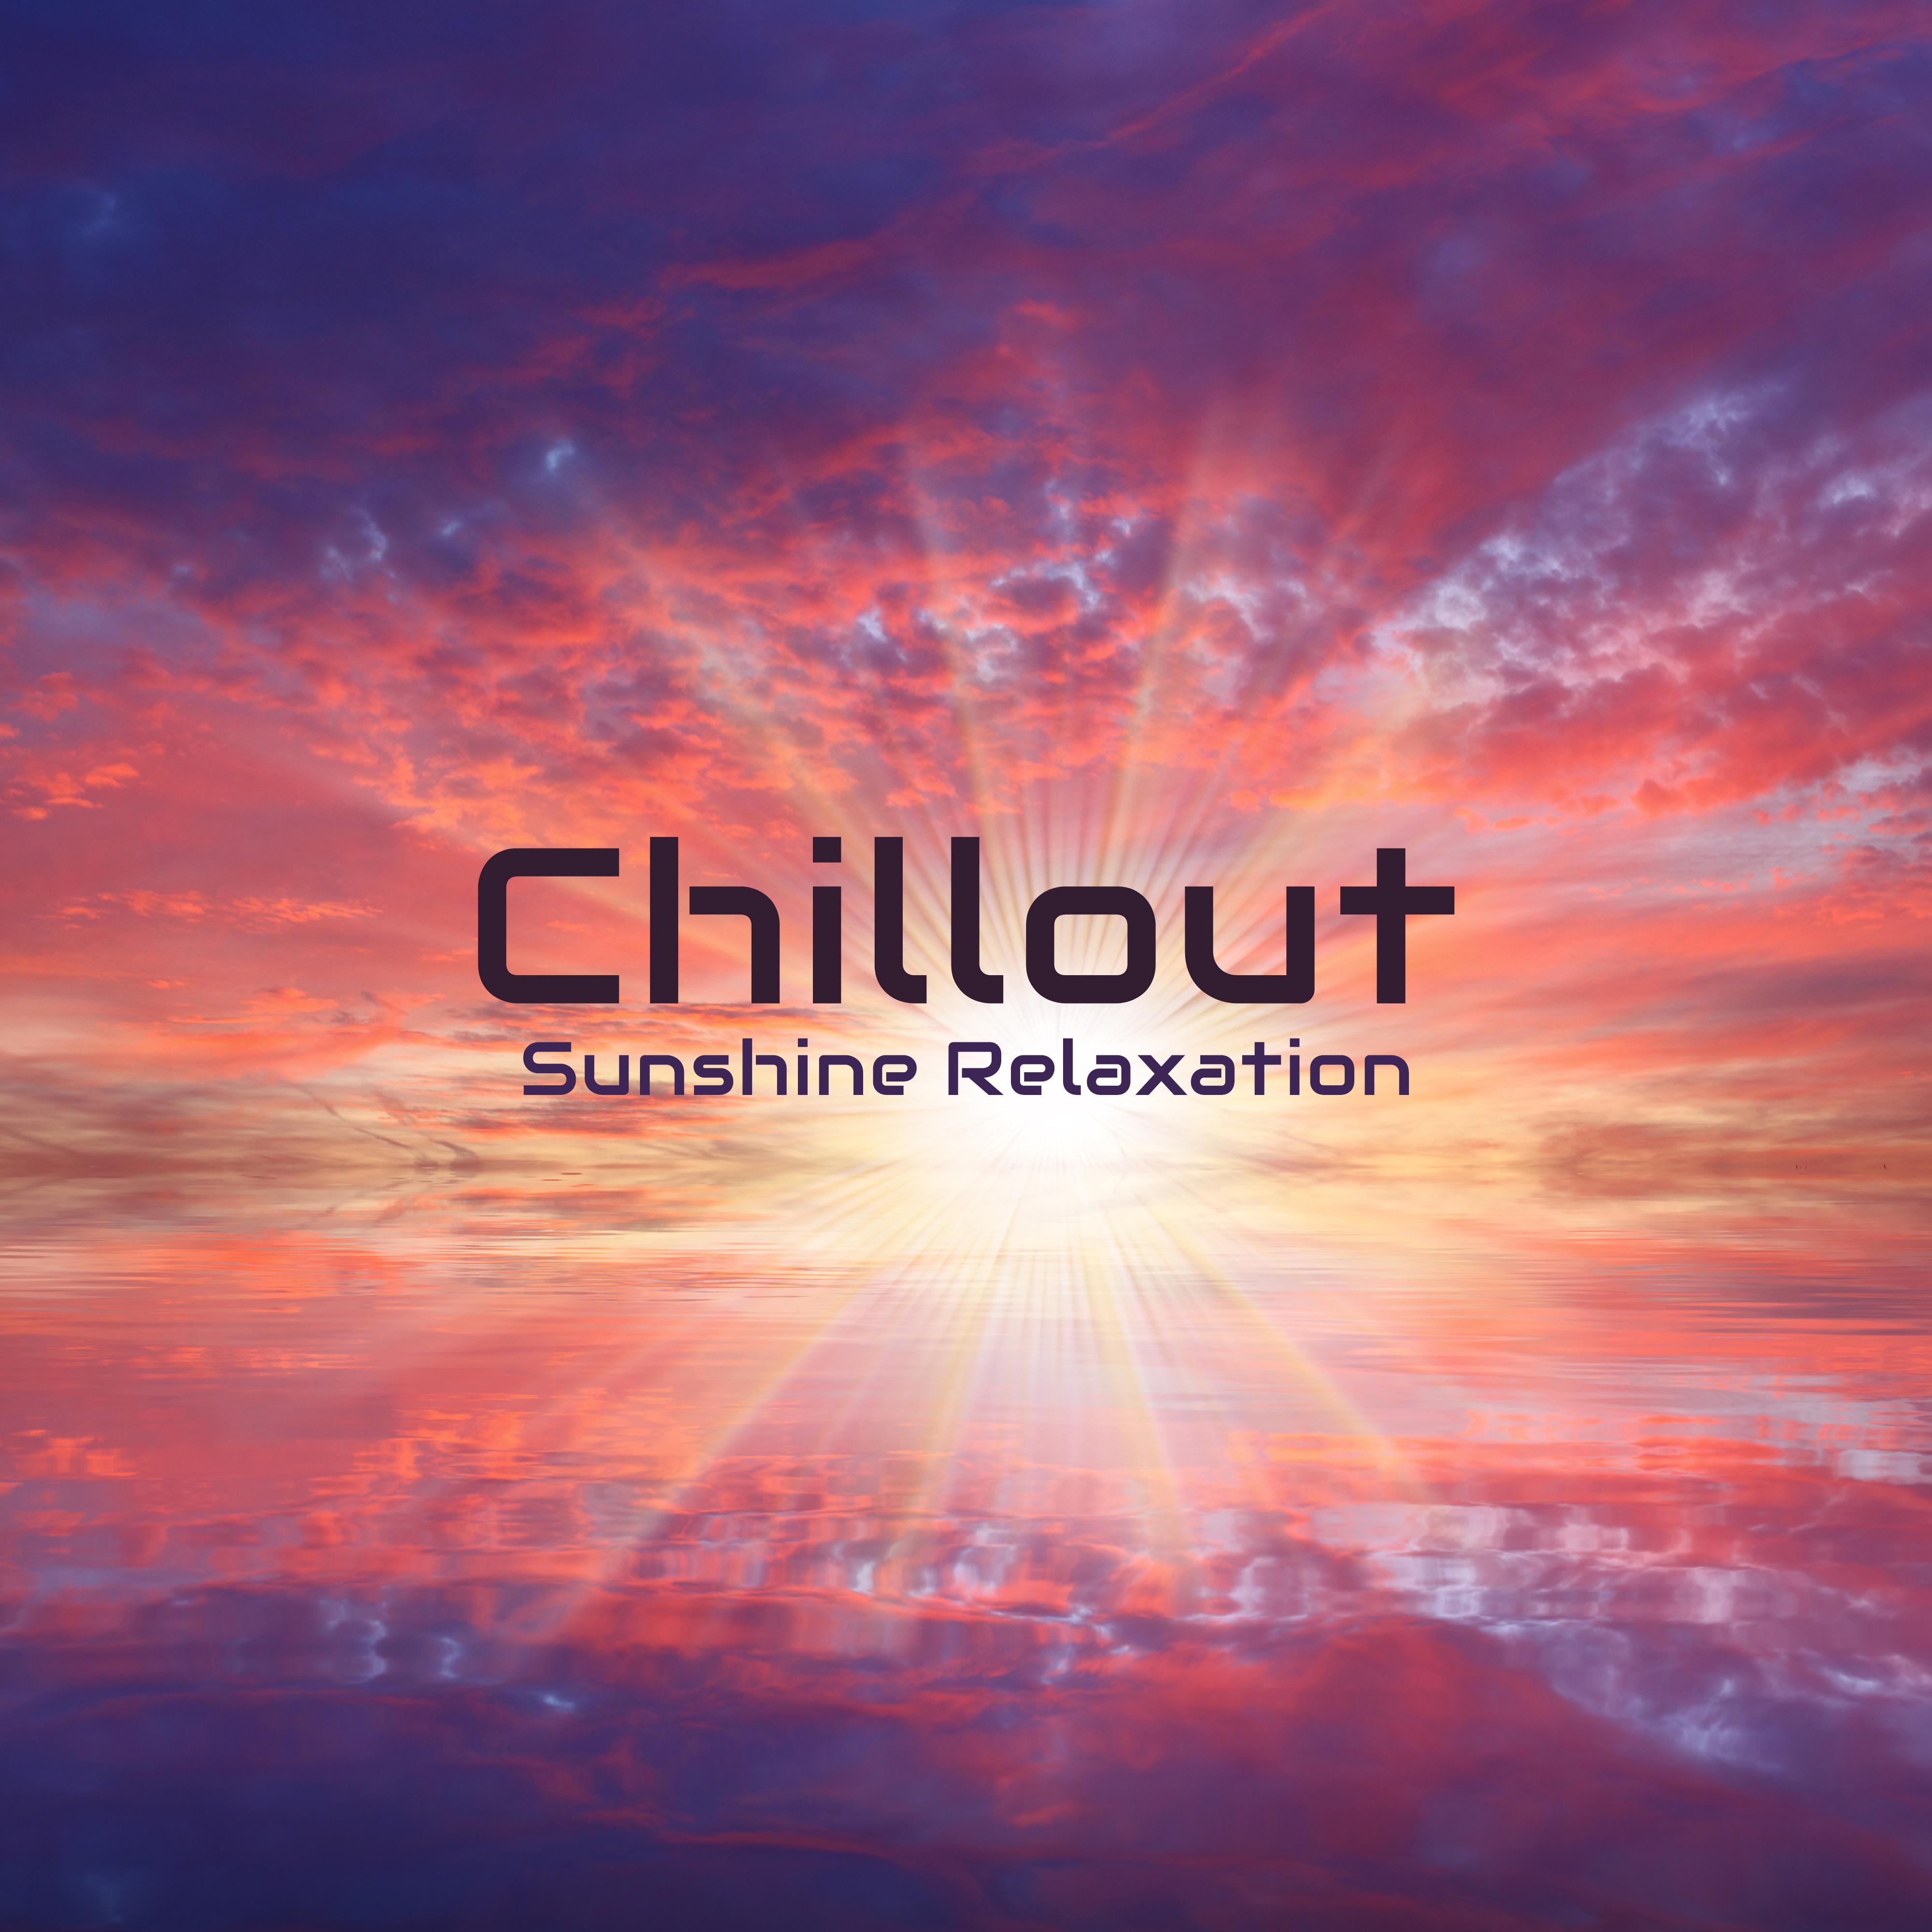 Chillout Sunshine Relaxation: Most Chilling Music in 2019, Perfect Electronic Vibes for Beach Relaxing, Calming Down & Rest Beats, Soft Melodies